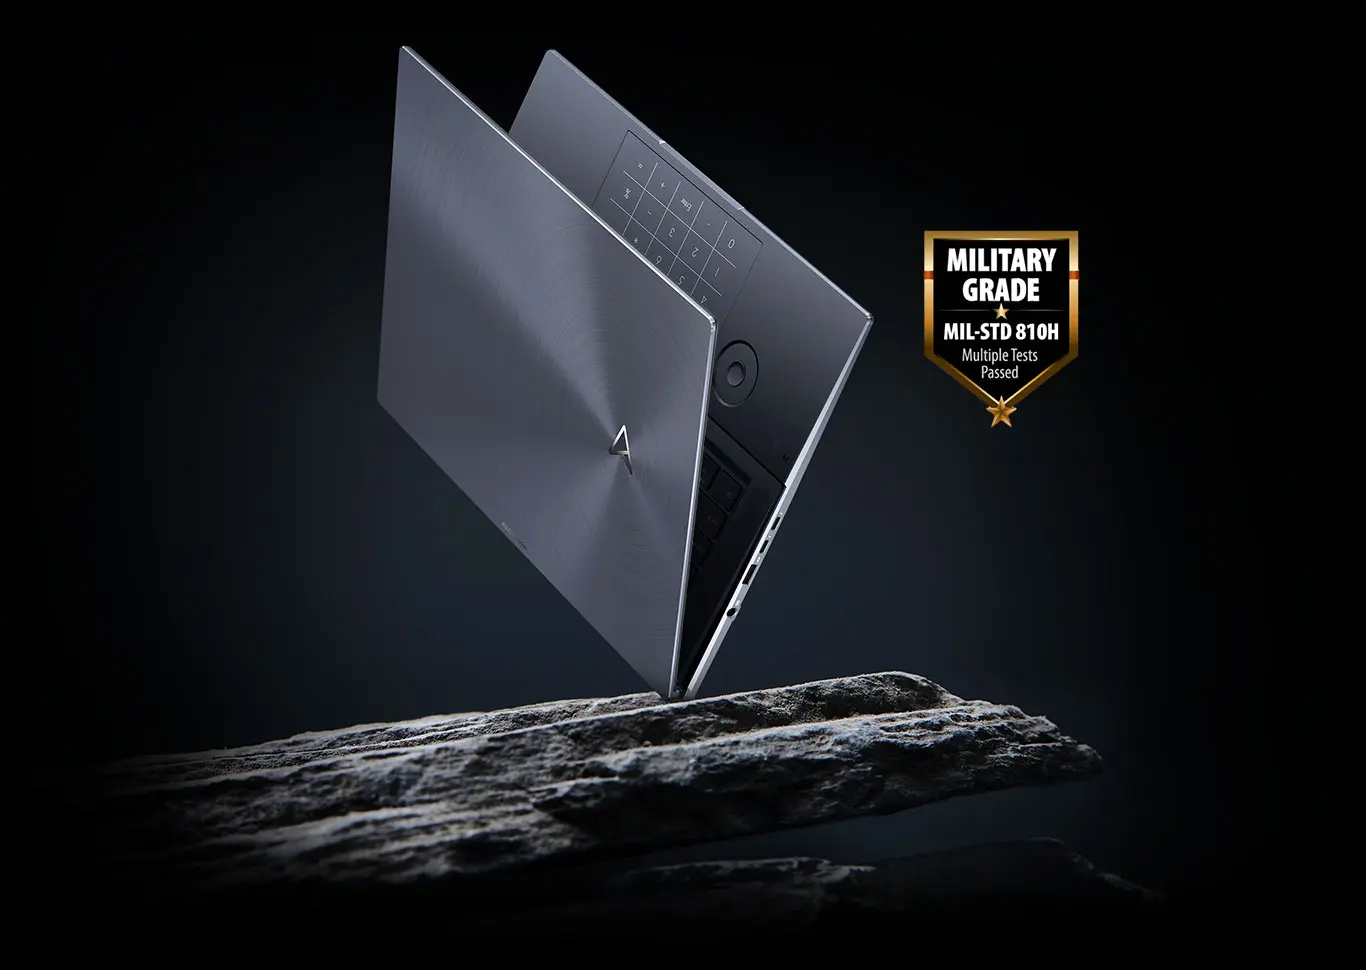 ASUS Zenbook Pro laptop floating in mid-air with US military grade MIL-STD 810H badge on the side